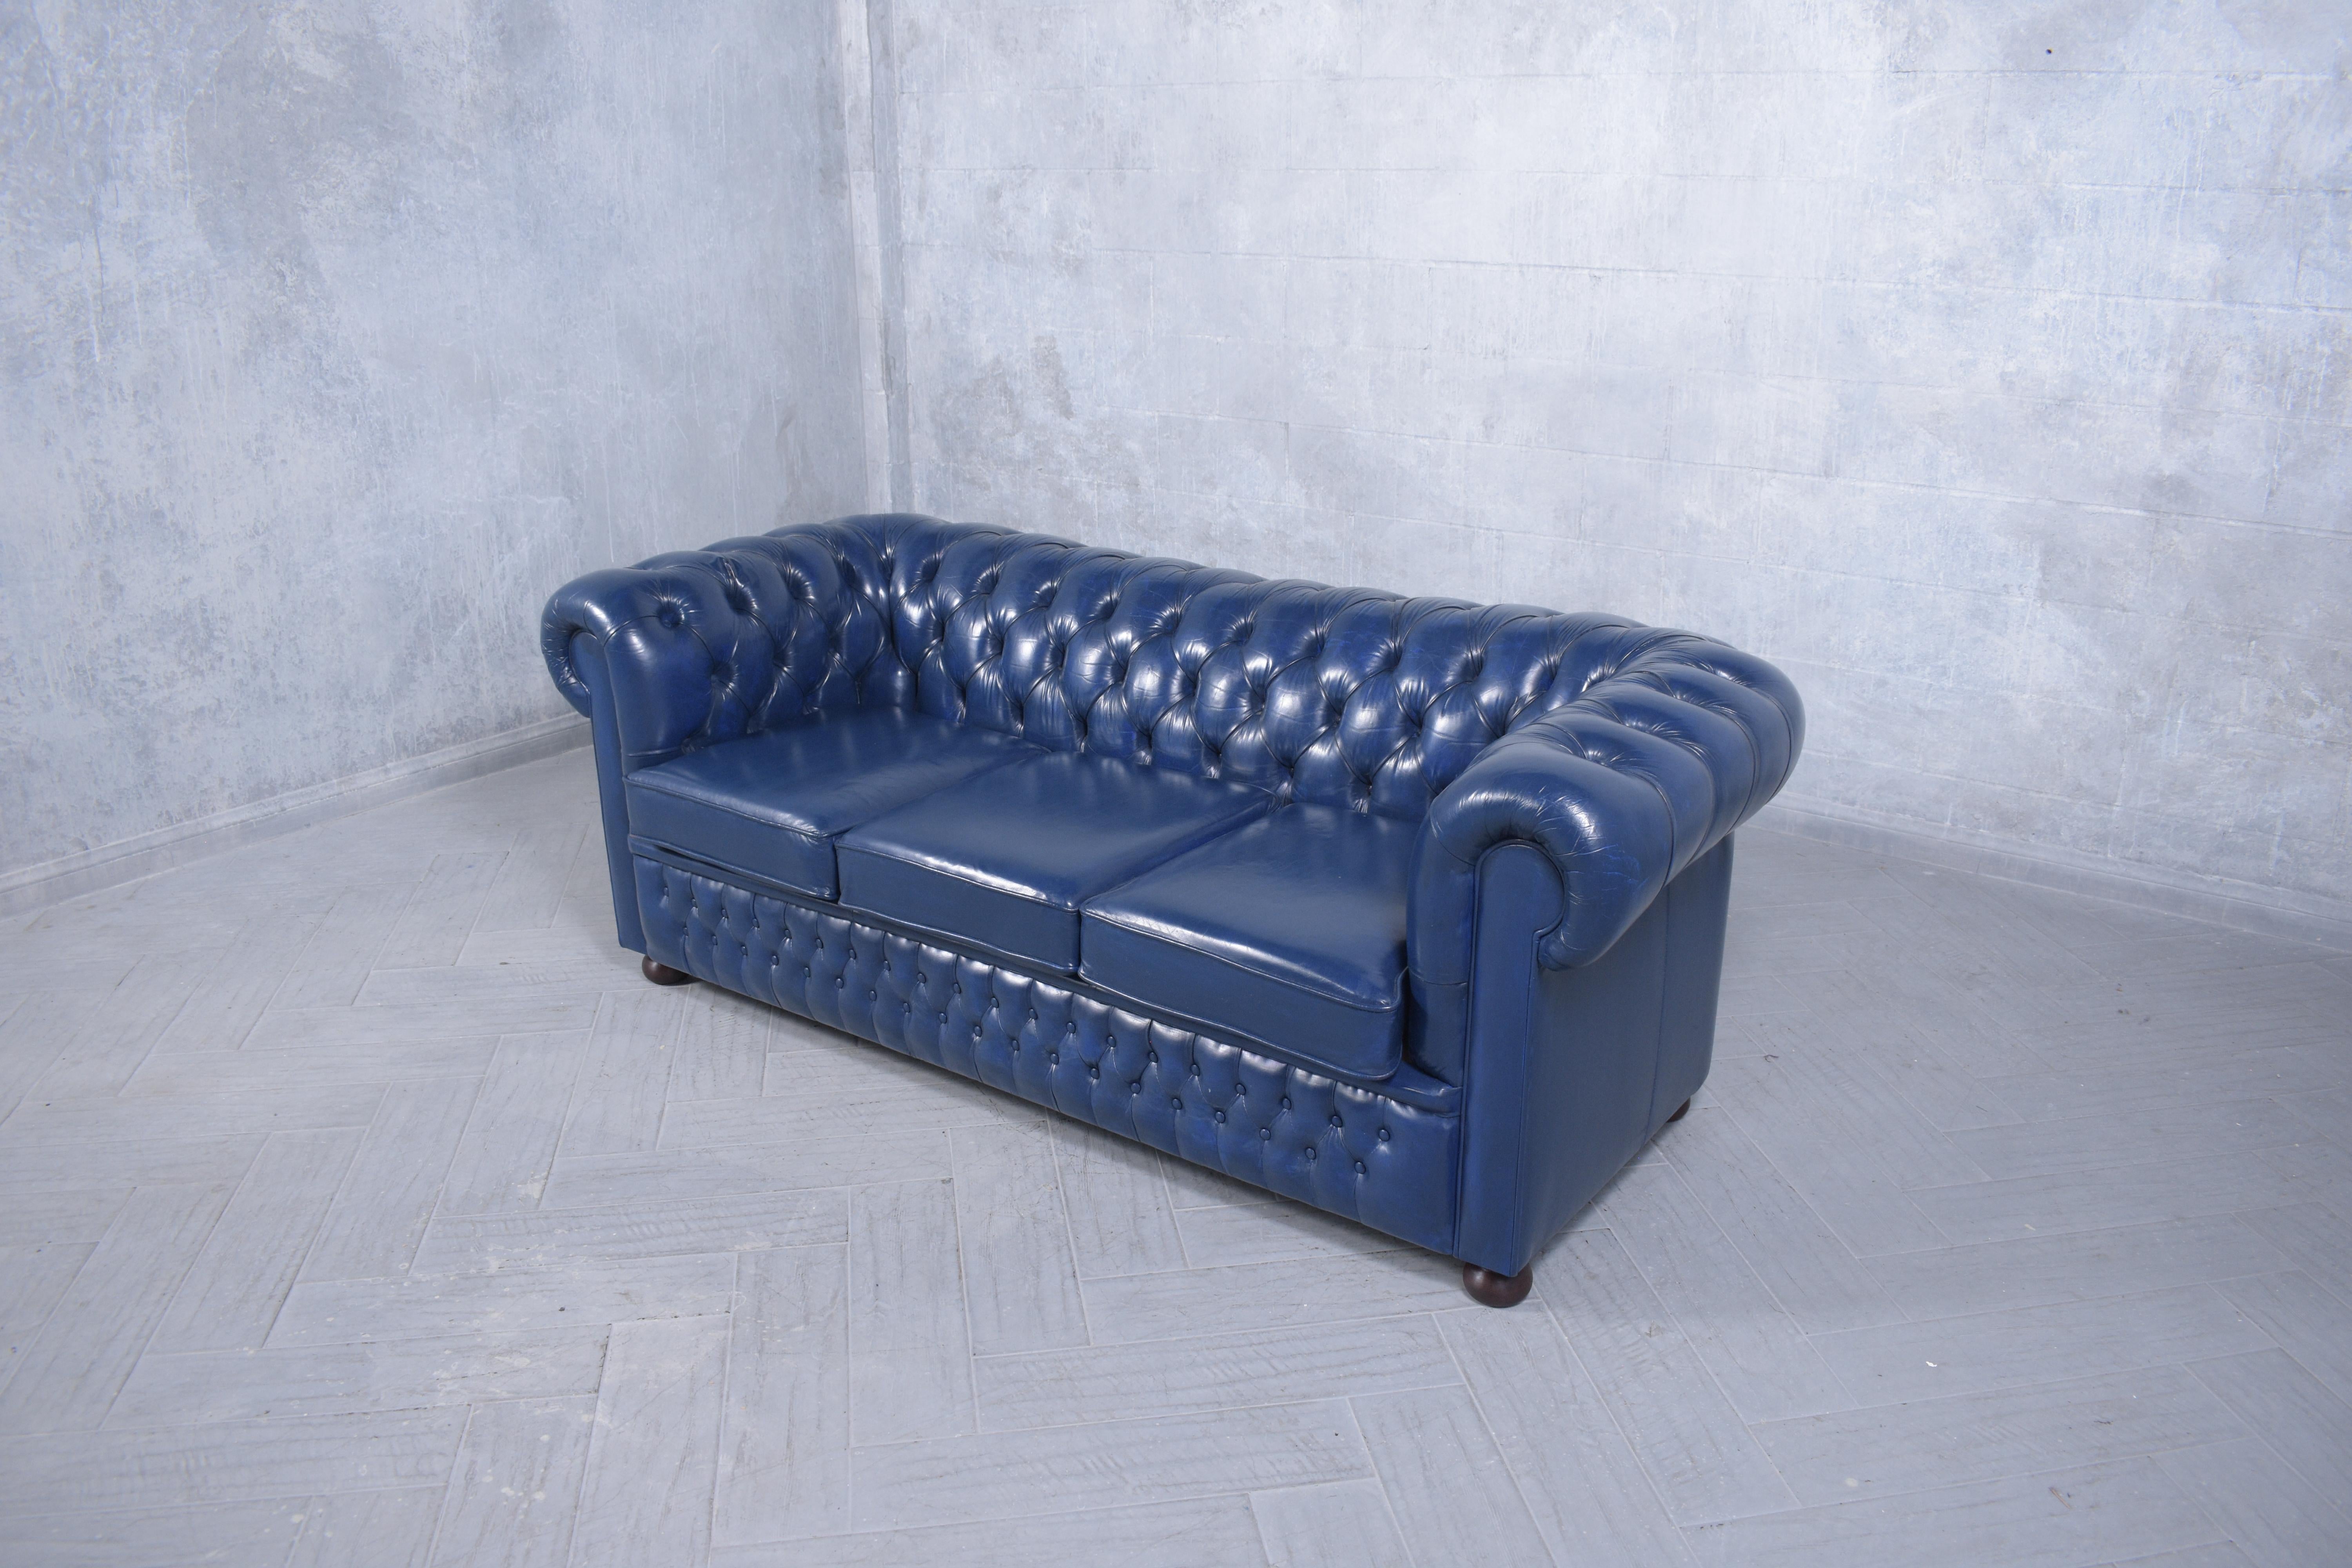 English Restored Vintage Chesterfield Sofa in Distressed Navy Leather For Sale